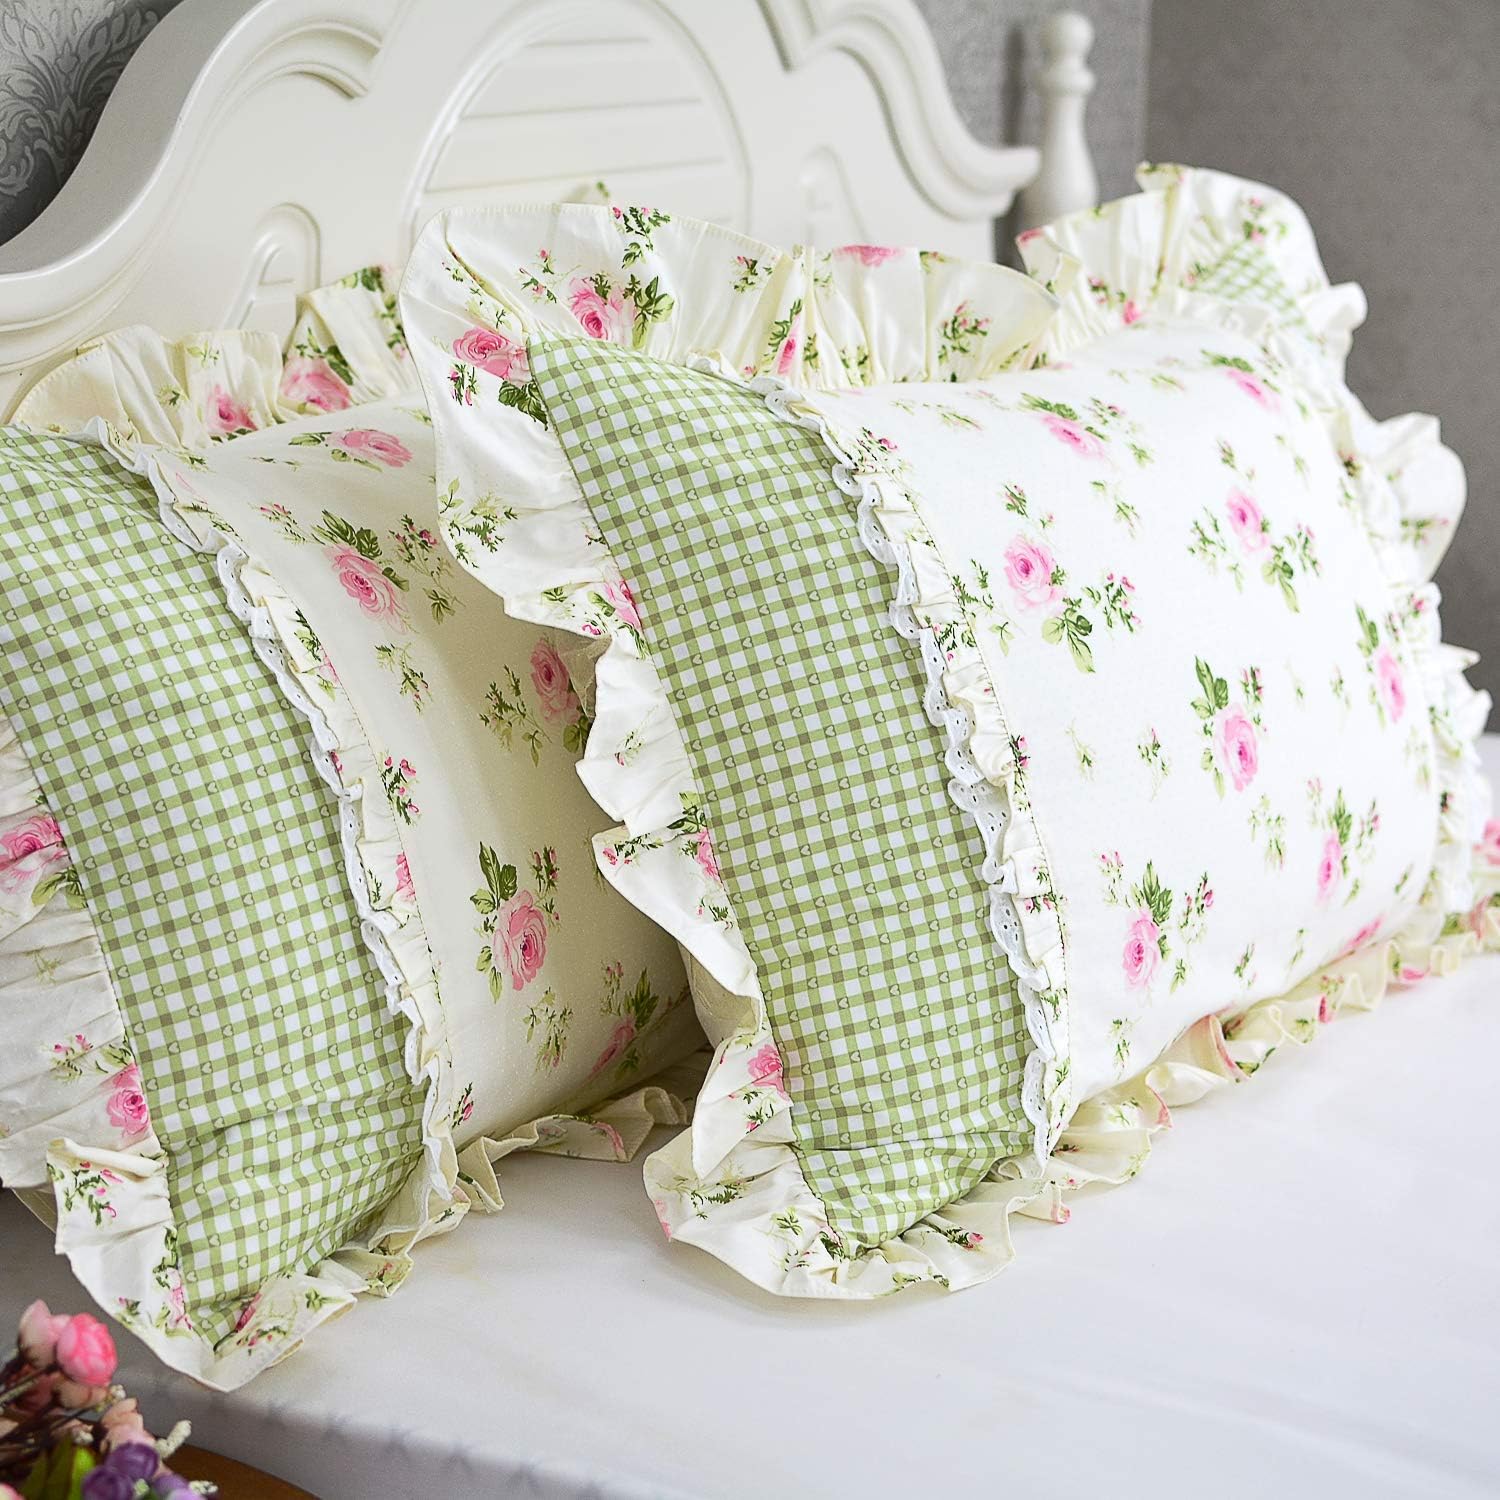 FADFAY Farmhouse Style Pillowcases Pink Rosetta Printed Gold with Green Plaid Elegant Country Style 100% Cotton Vintage Lace Ruffles Bedding Pillow Covers Exquisite Craft Standared Size 19 x 29